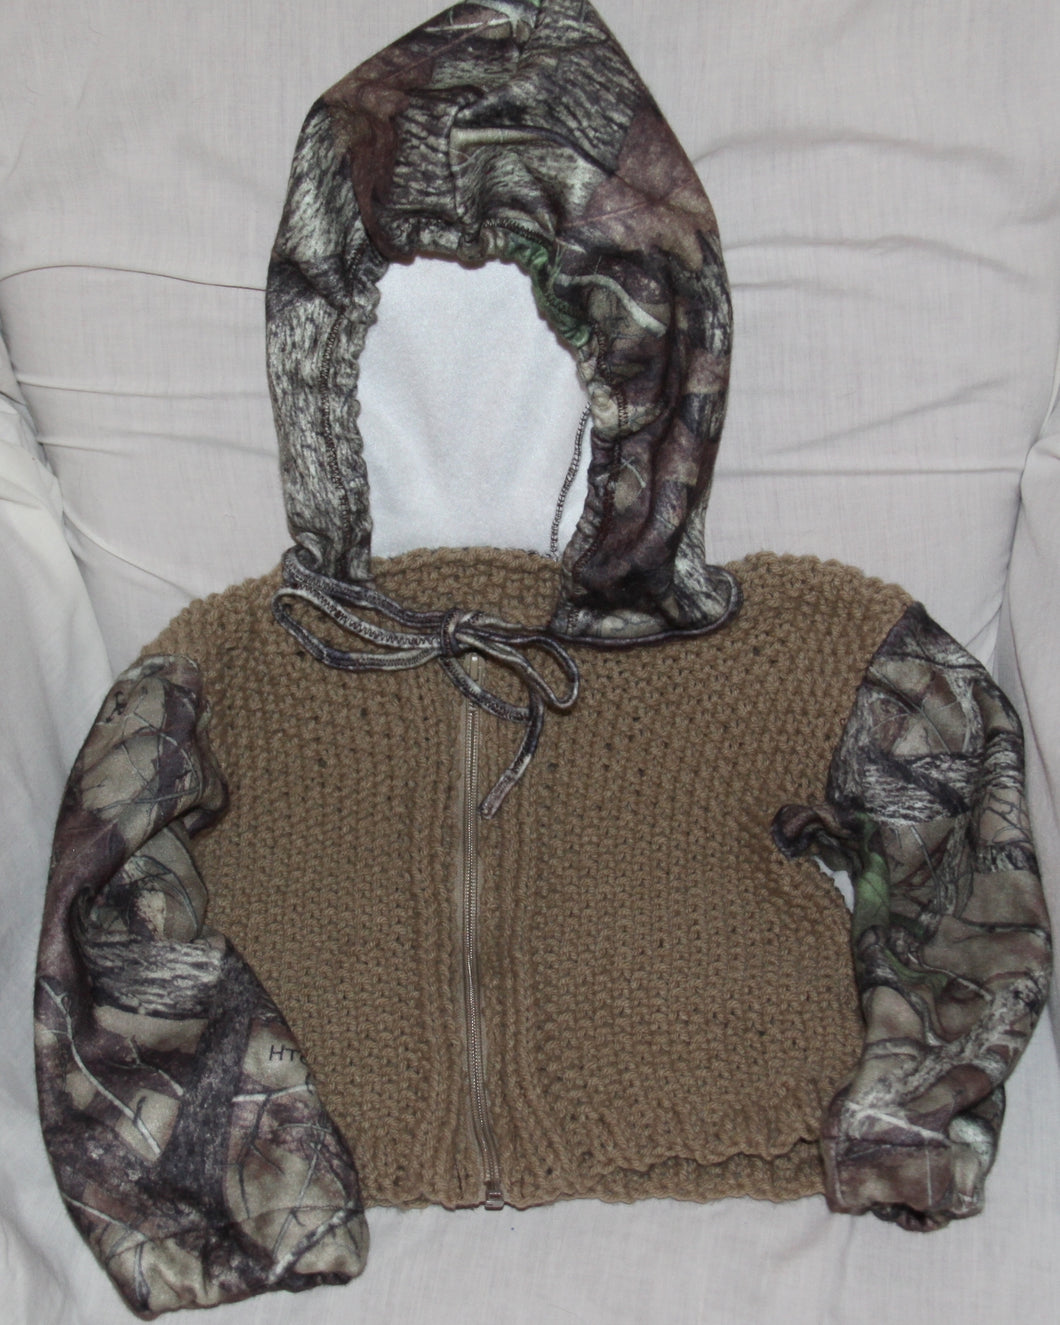 Child's Hand Knit Cardigan Hooded Sweater - nw-camo